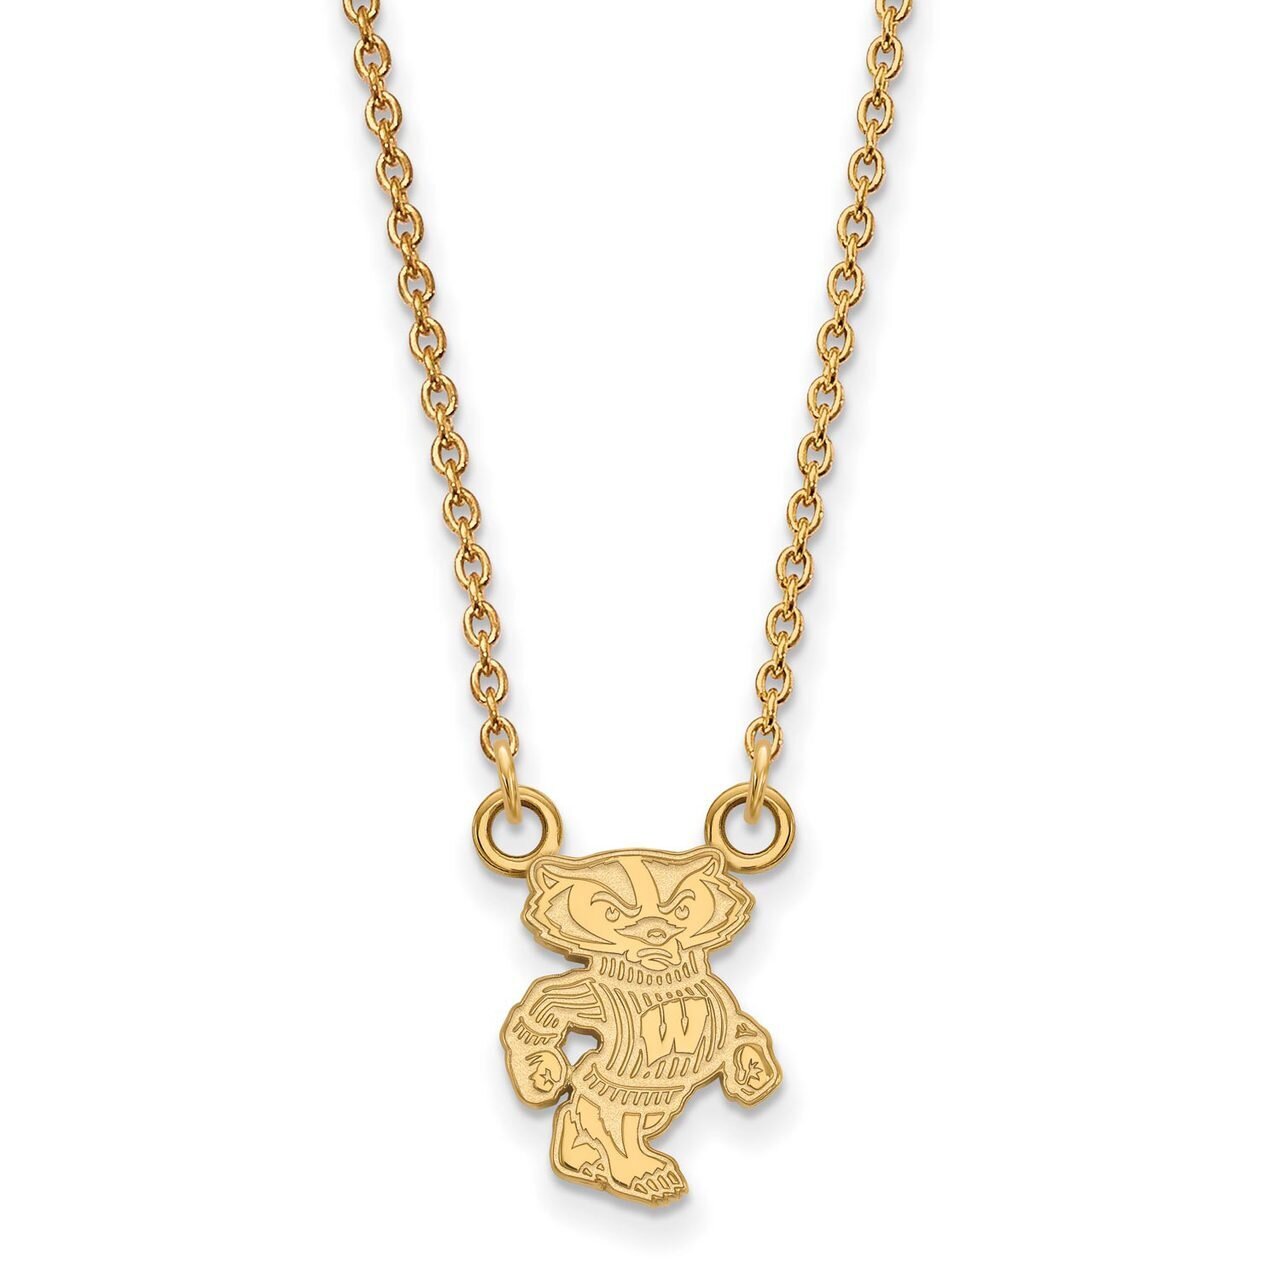 University of Wisconsin Small Pendant with Chain Necklace 10k Yellow Gold 1Y054UWI-18